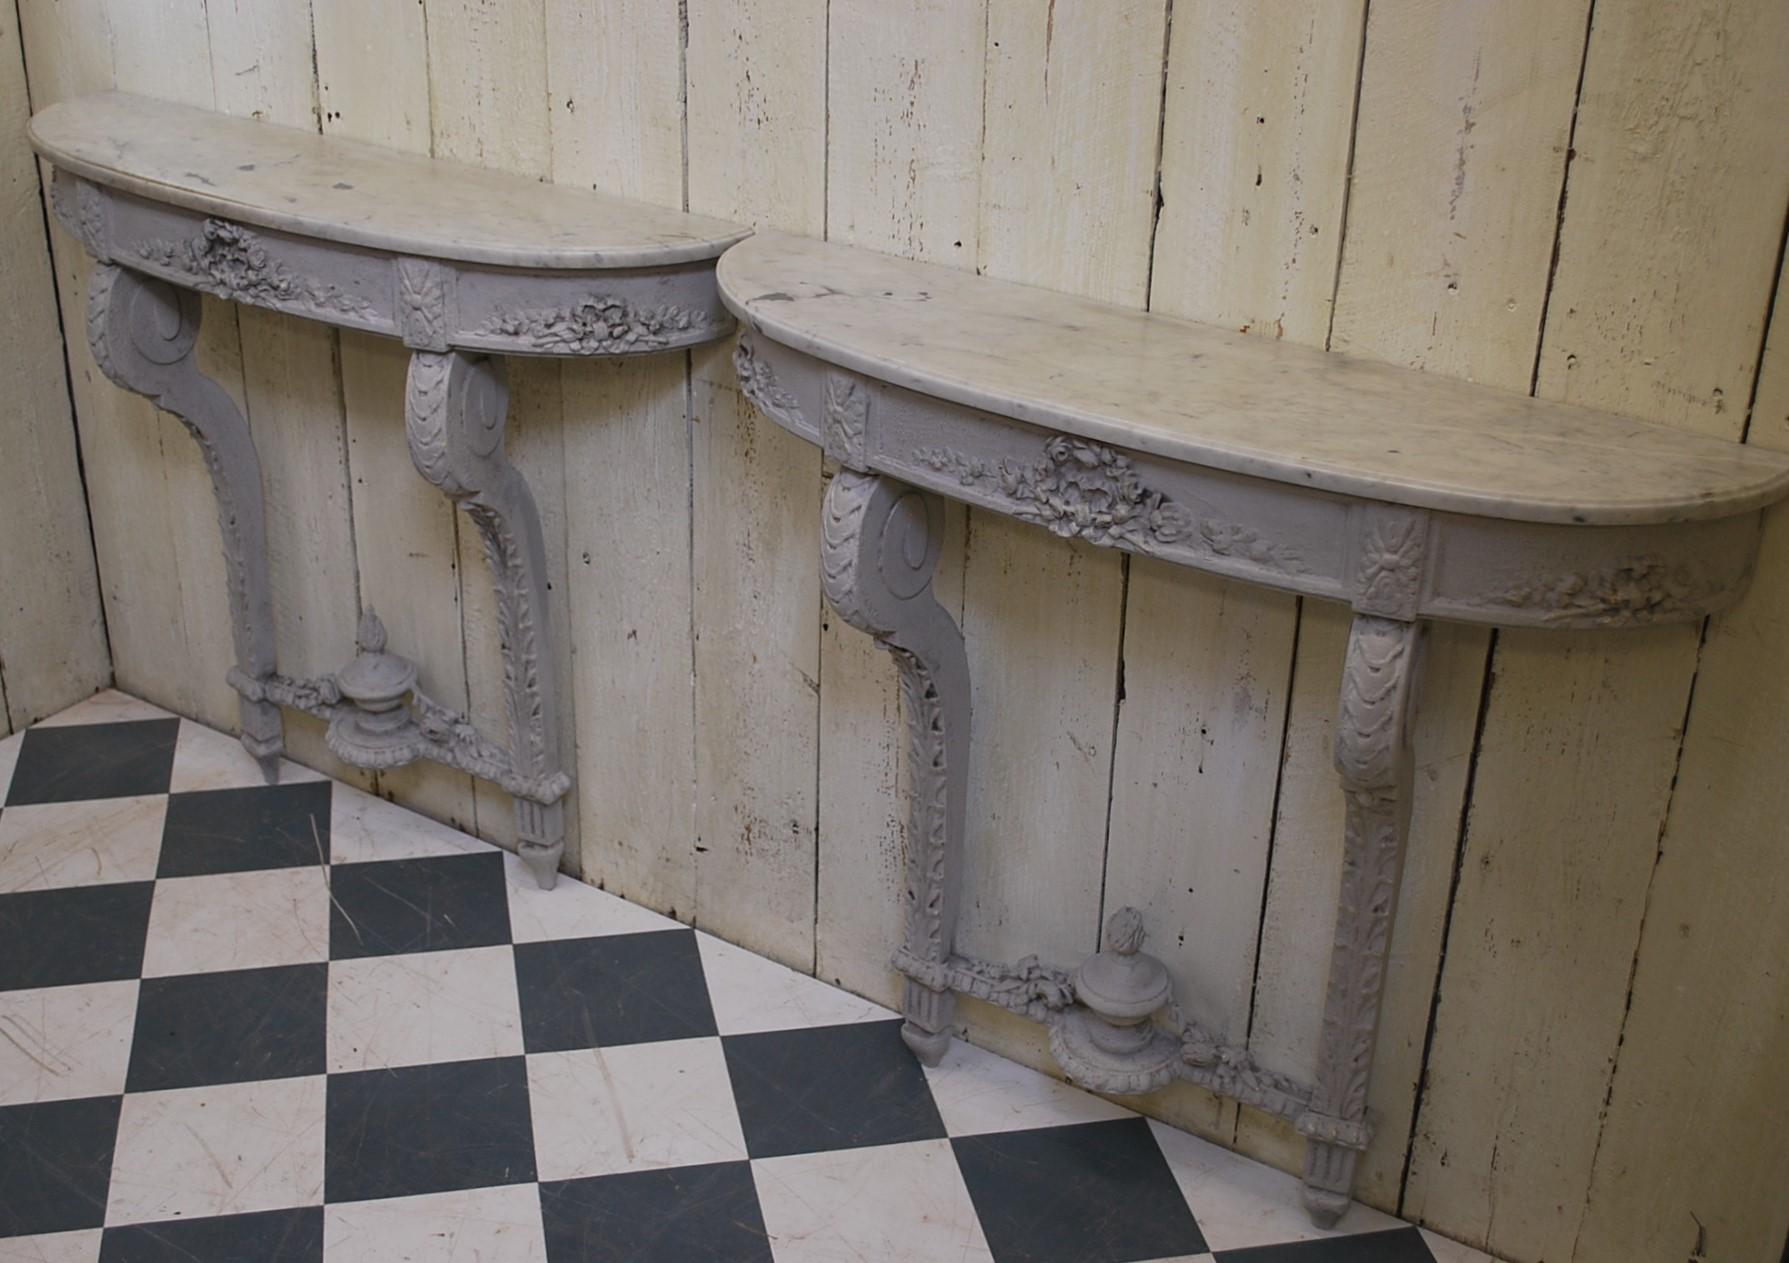 An unusual pair of French console tables with original Carrera marble tops. Decorated in grey paint of foiage and classical motifs.
Pairs of decorative consoles are always hard to find and these are a nice example.